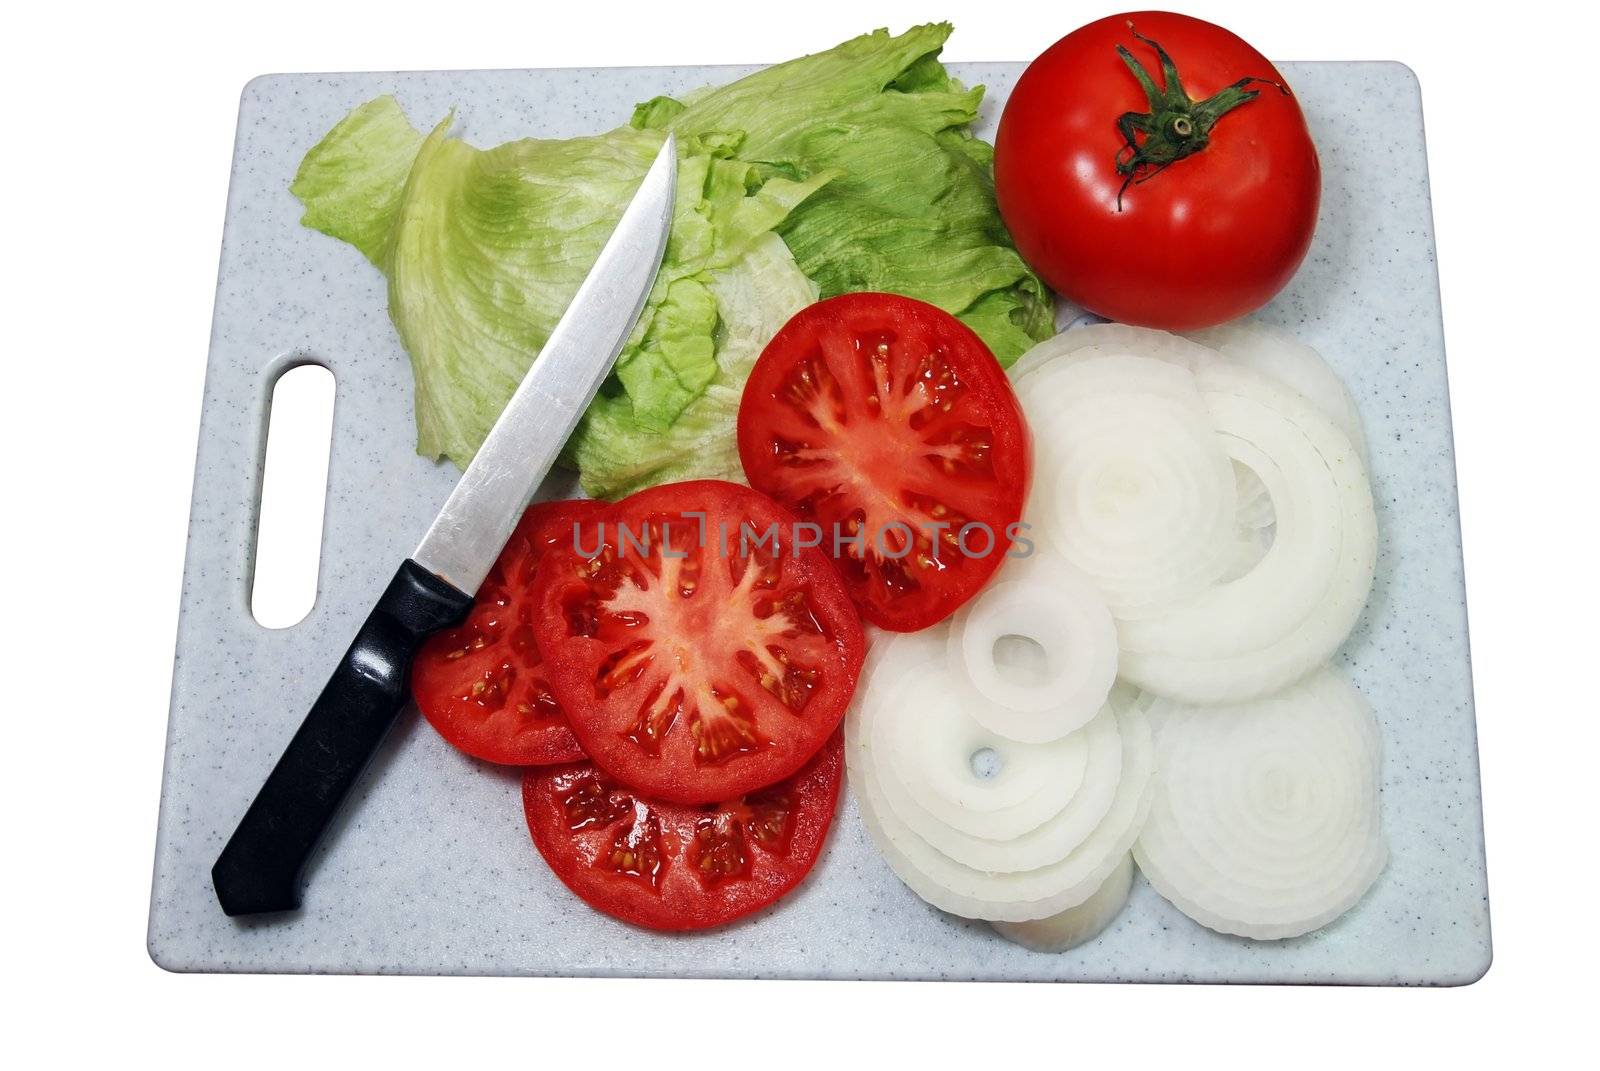 Tomato, lettuce, onions and knife on cutting board.  Isolated on white background with clipping path.